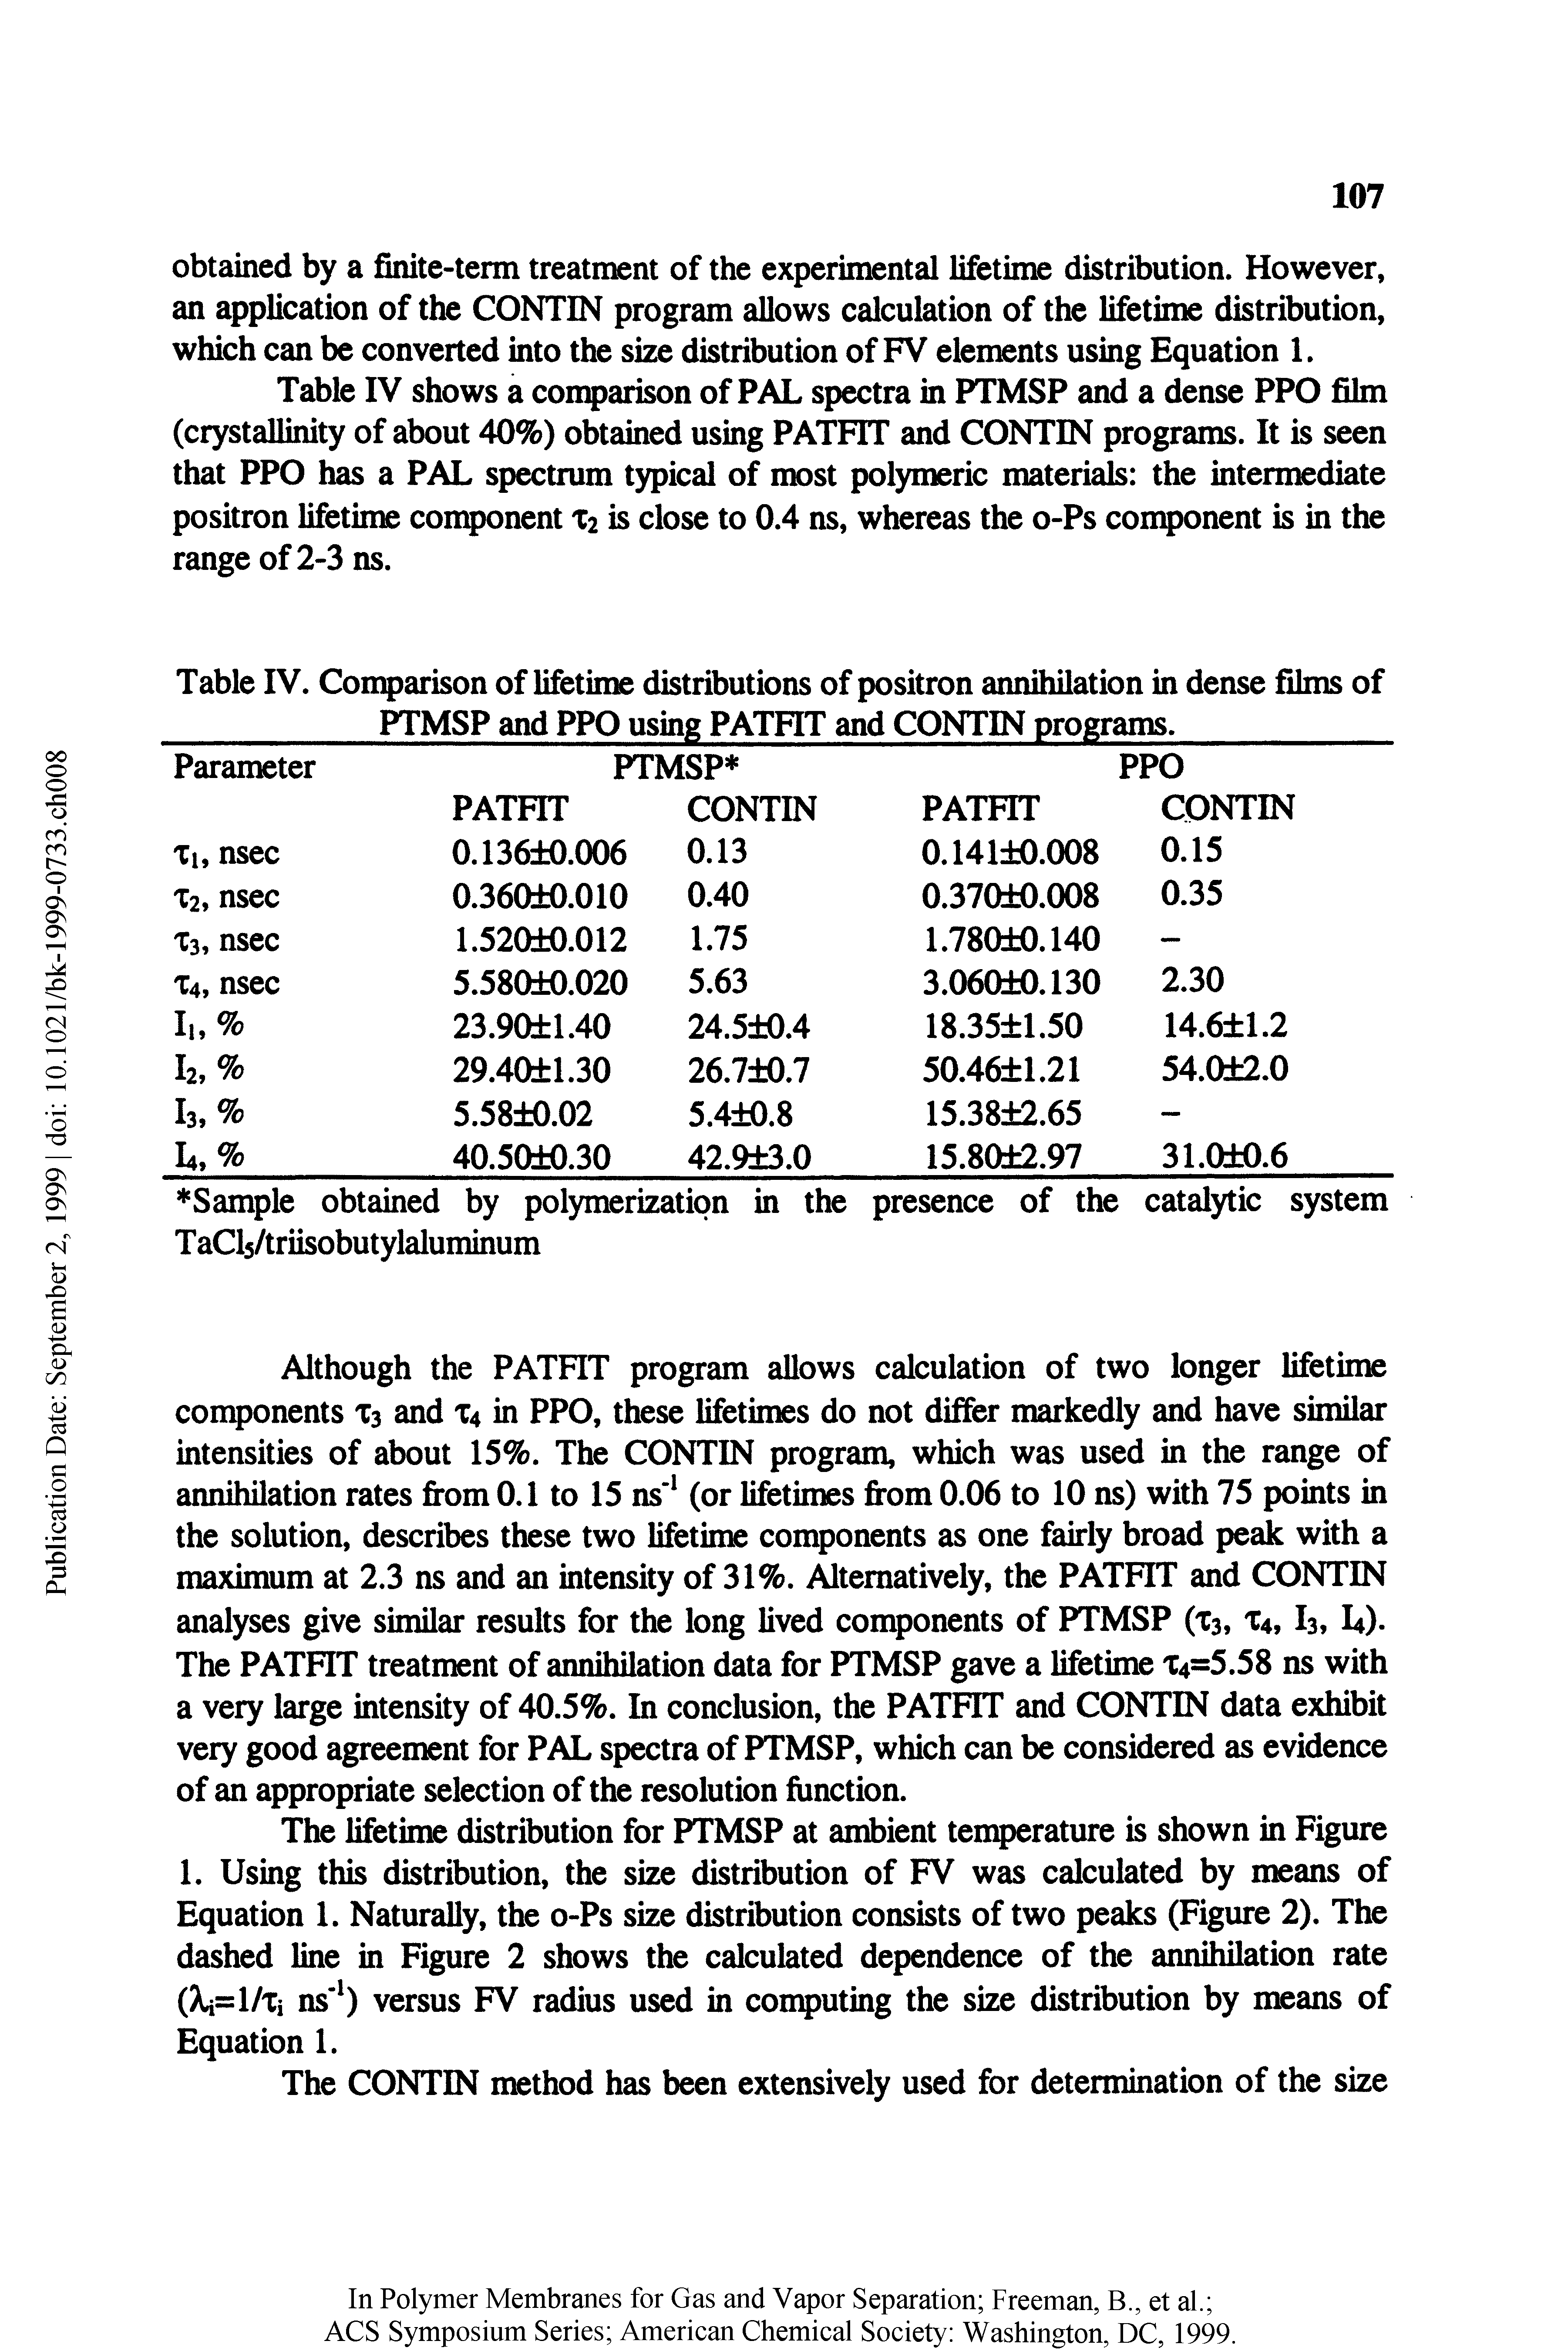 Table IV. Comparison of lifetime distributions of positron aimihilation in dense films of MSP and PPO using PATFIT and CONTIN programs.